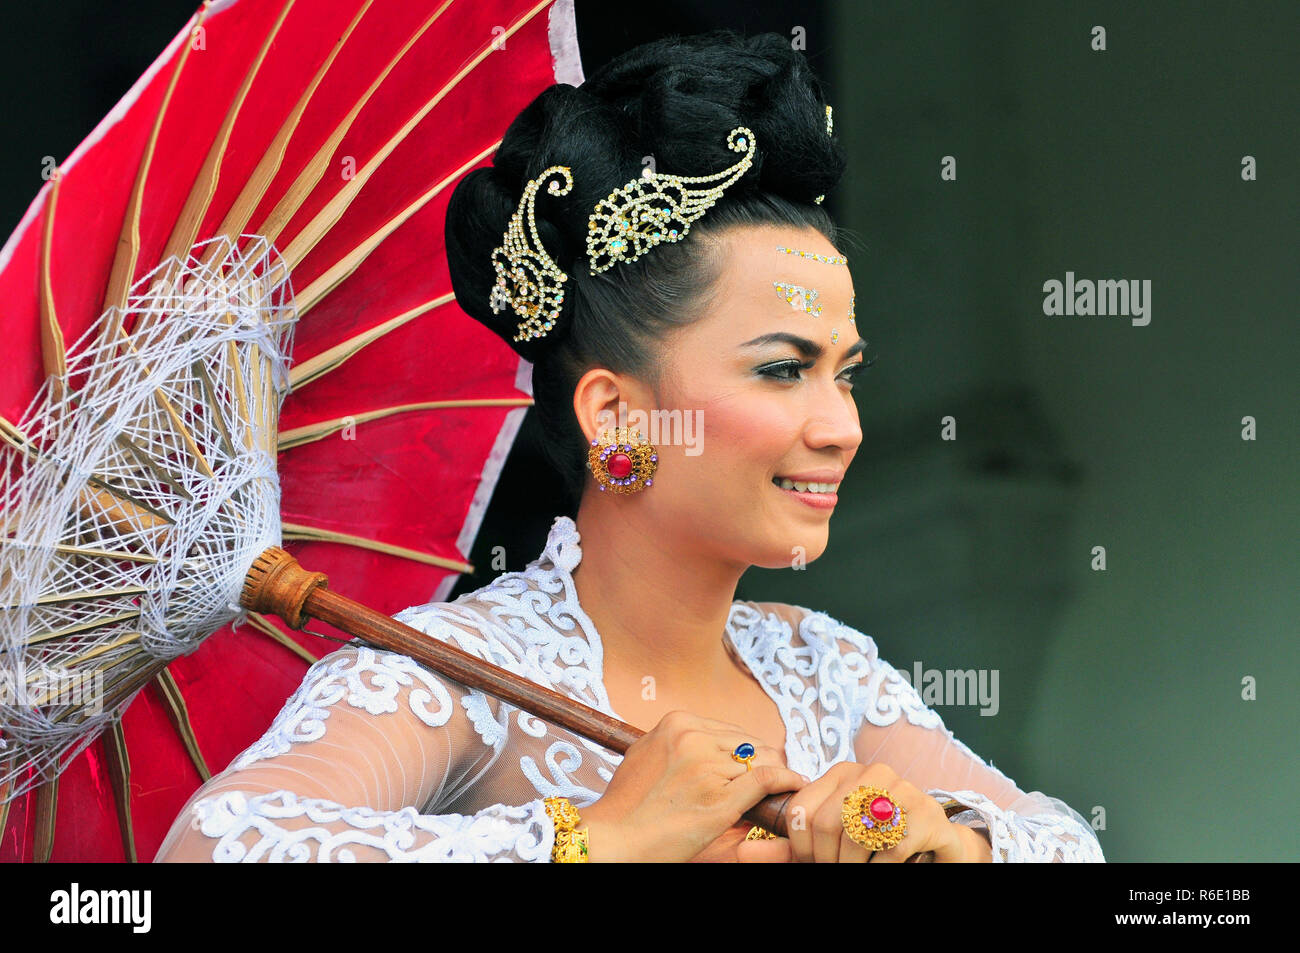 Performers Enacting Wedding Scene In Preparation For Religious Ceremony In Tirtagangga Taman Ujung Water Palace Bali, Indonesia Stock Photo